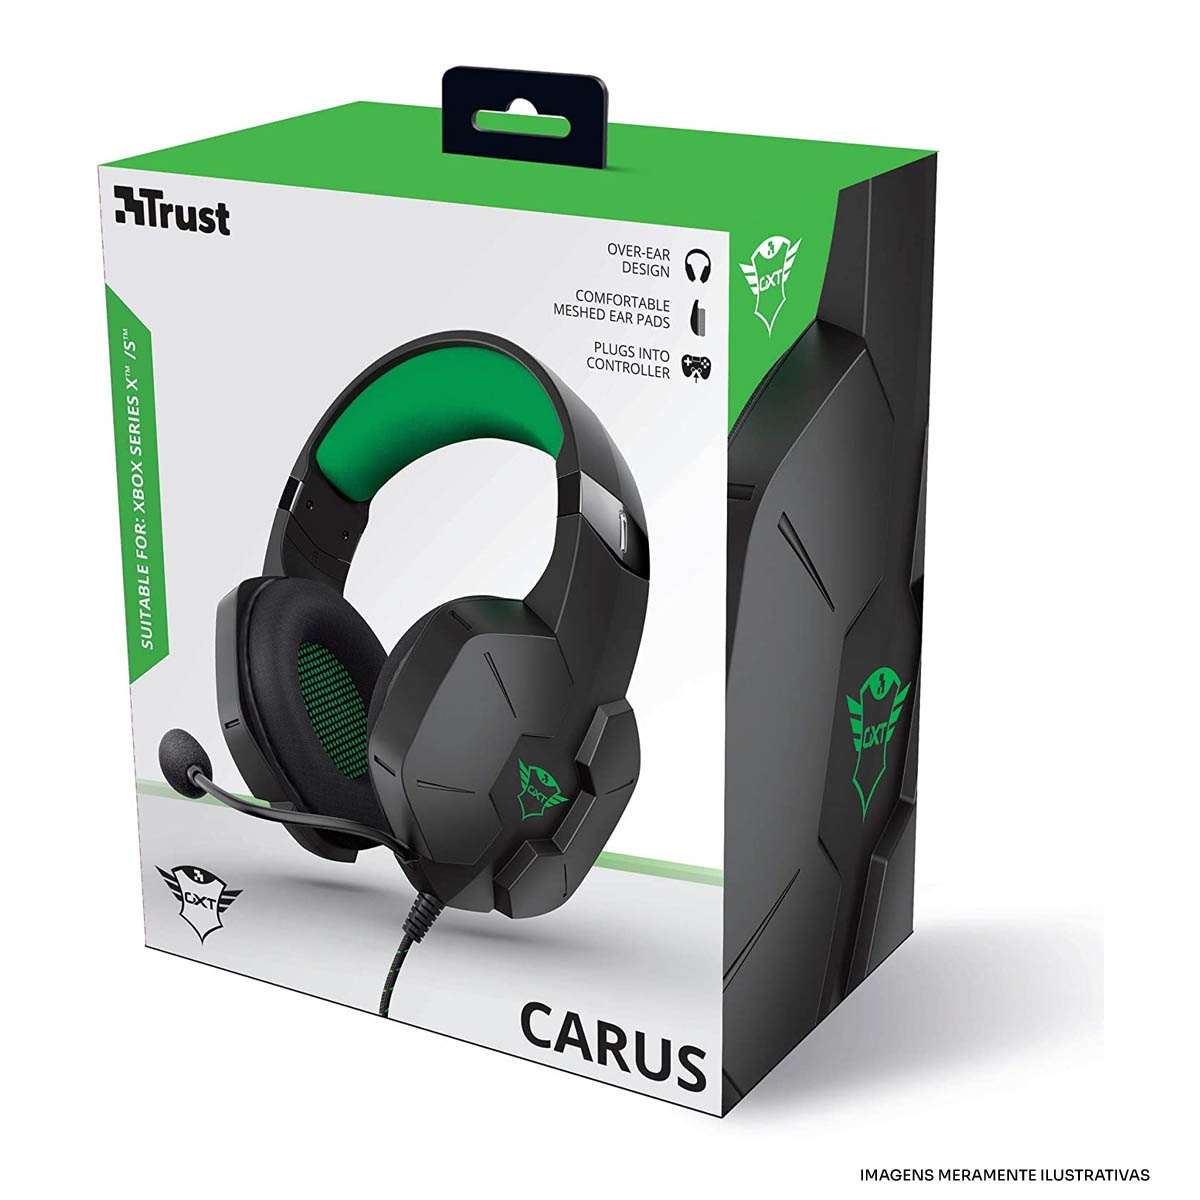  GXT 323X Carus Gaming Headset for Xbox